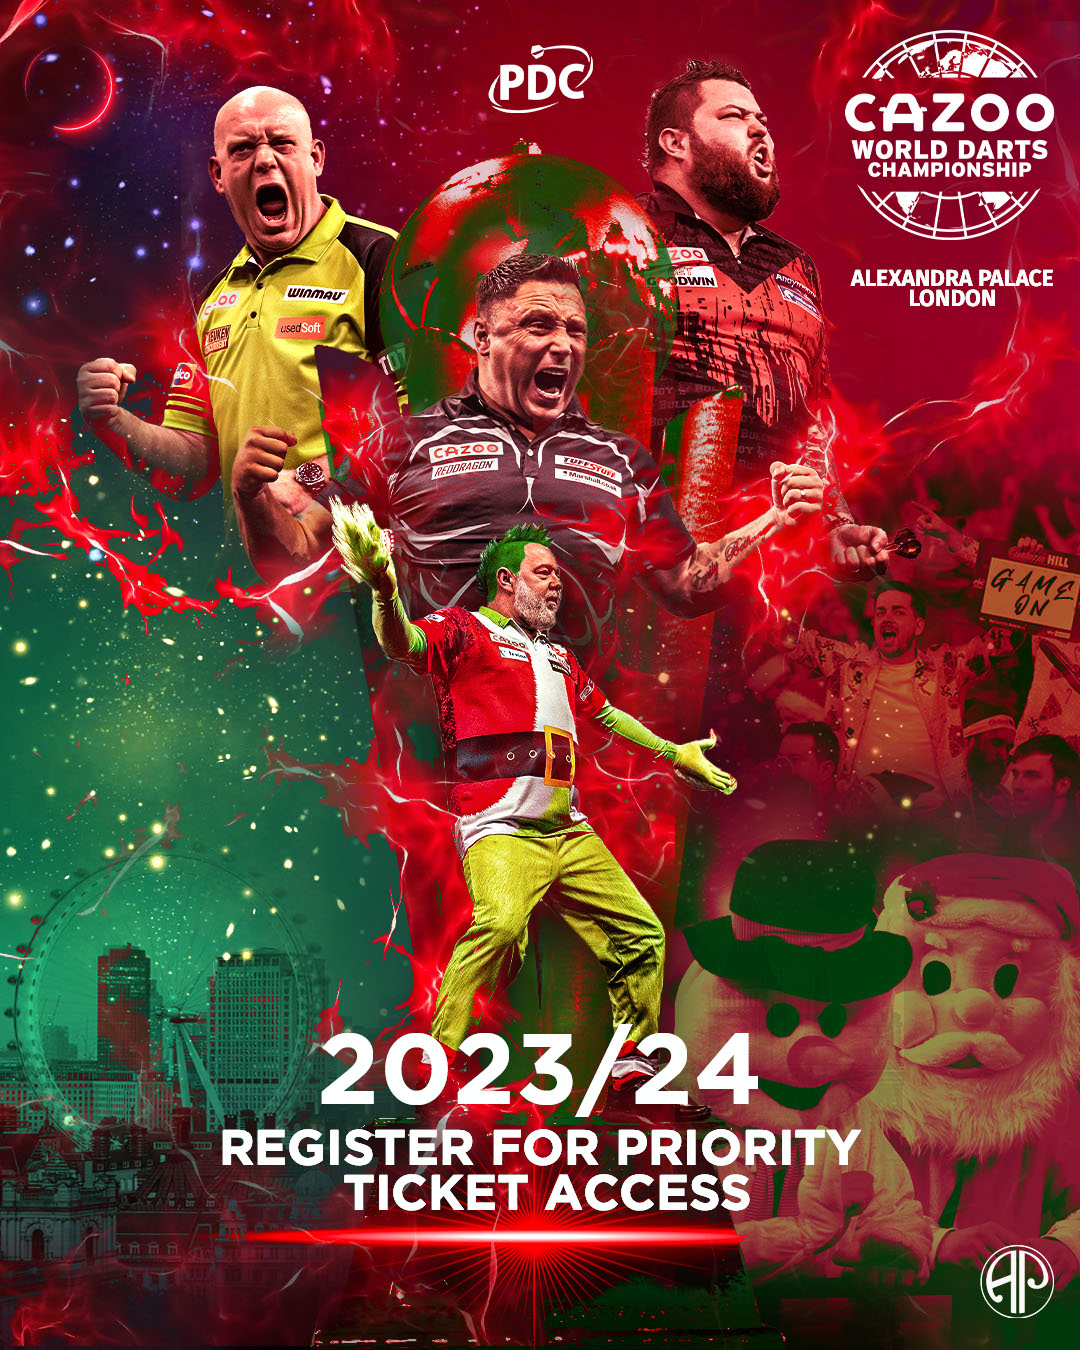 Venture Stejl Decrement Twitter-এ PDC Darts: "Tickets sold out for this year's World Championship  in 48 hours! Register now for priority ticket access to the 2023/24 World  Darts Championship and give yourself the best chance